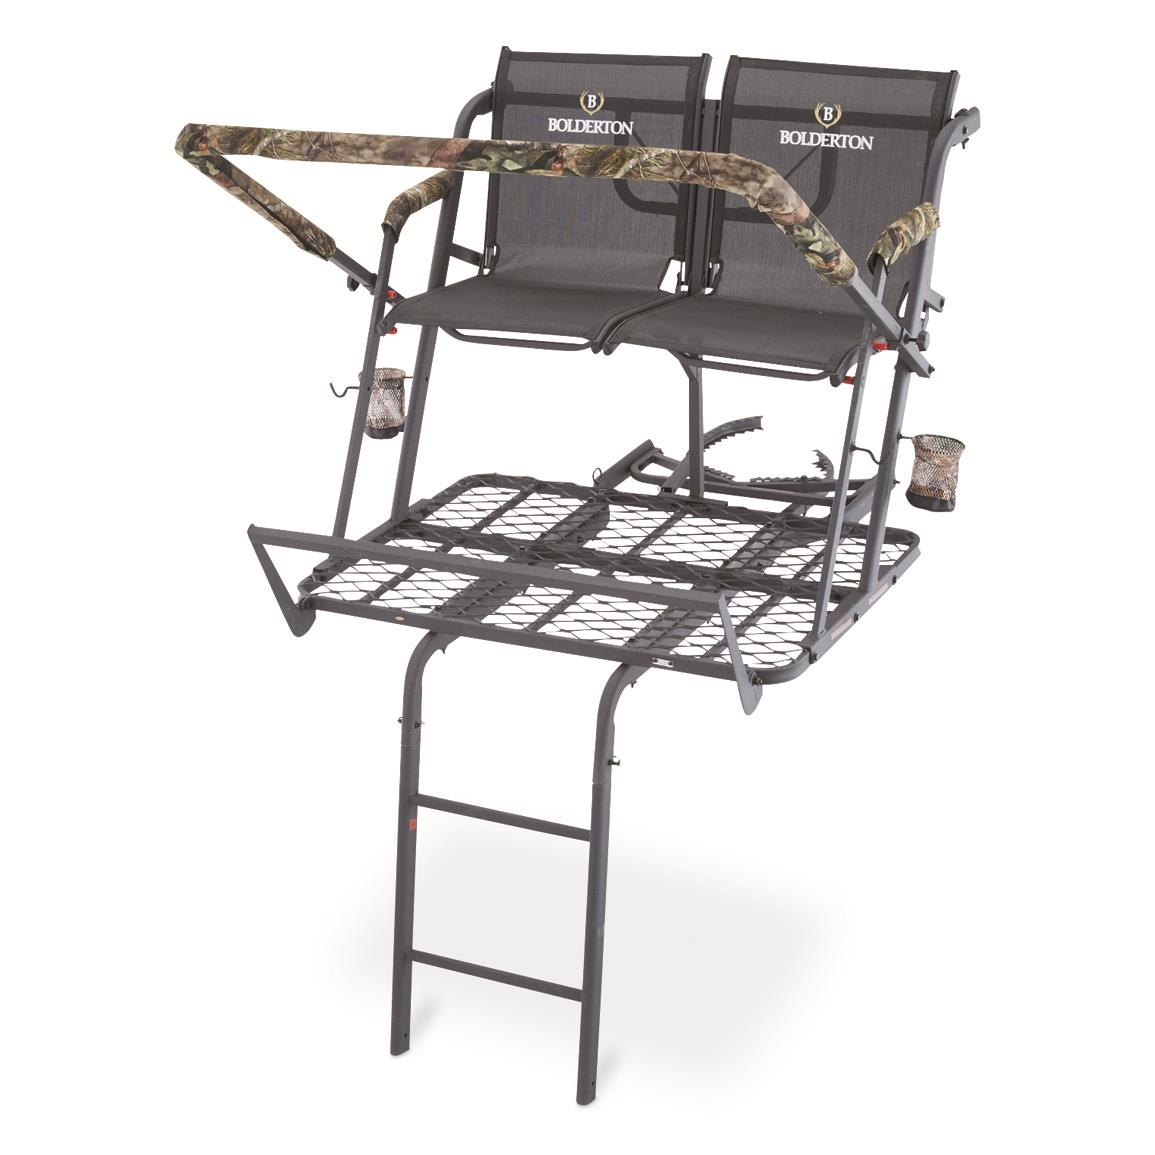 Bolderton 18' 2-Man Ladder Tree Stand with Grizzly Grip